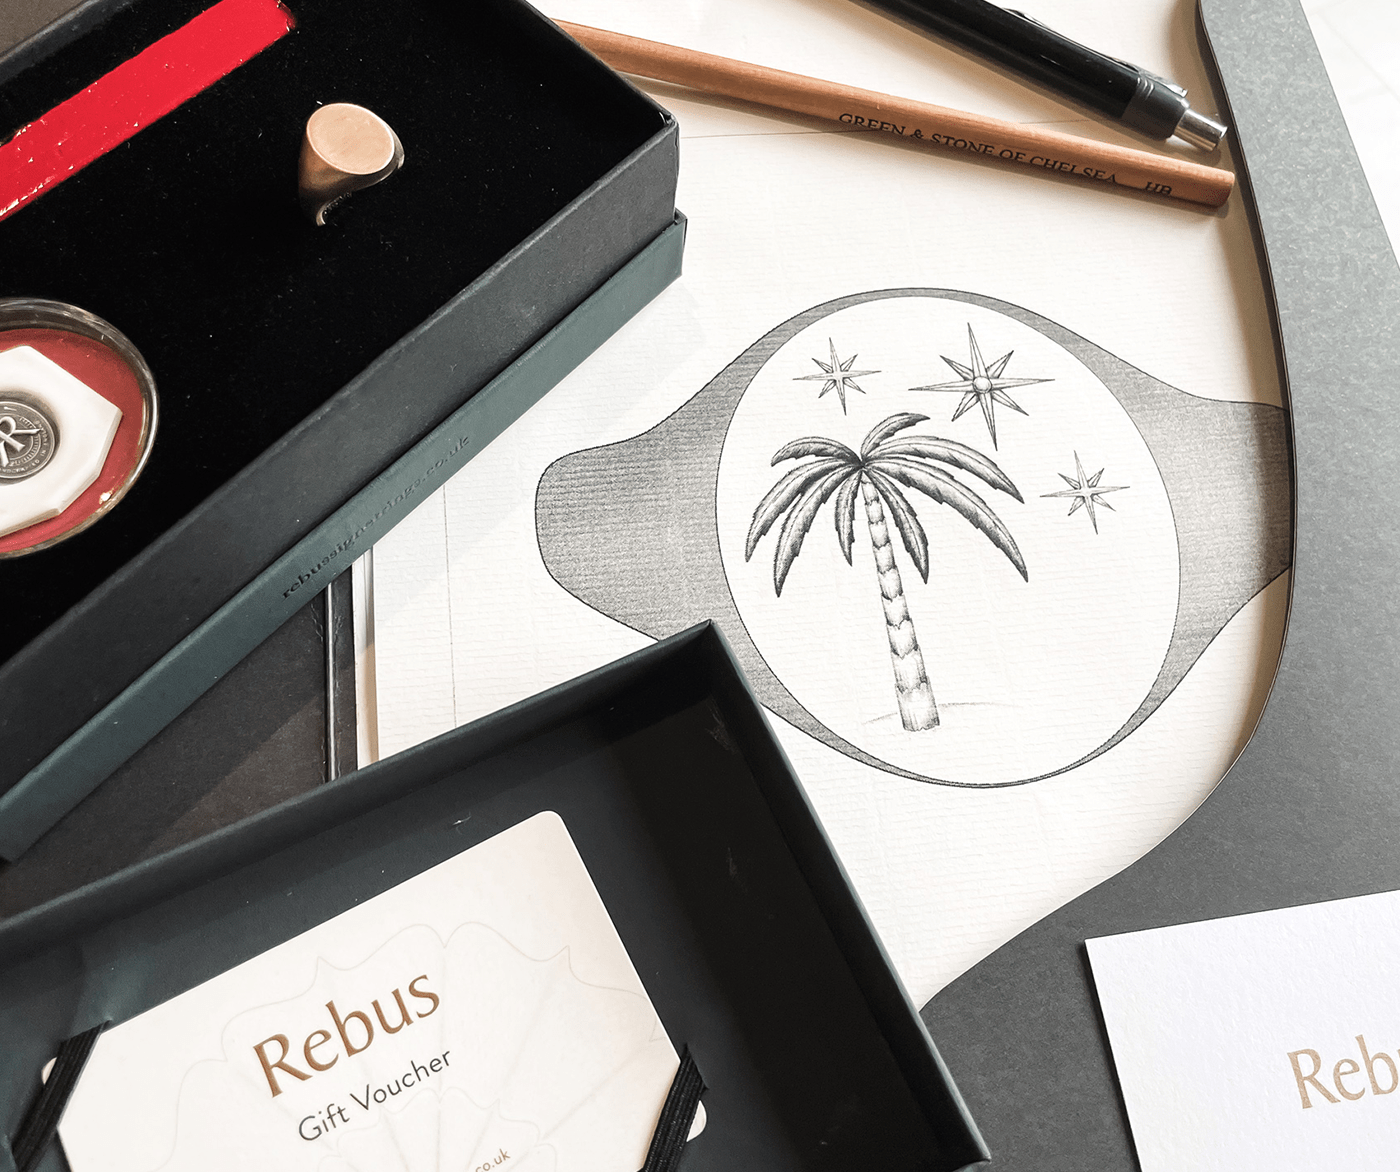 Rebus bespoke signet ring gift box with bronze replica ring, wax seal, and personalised illustration for hand engraving